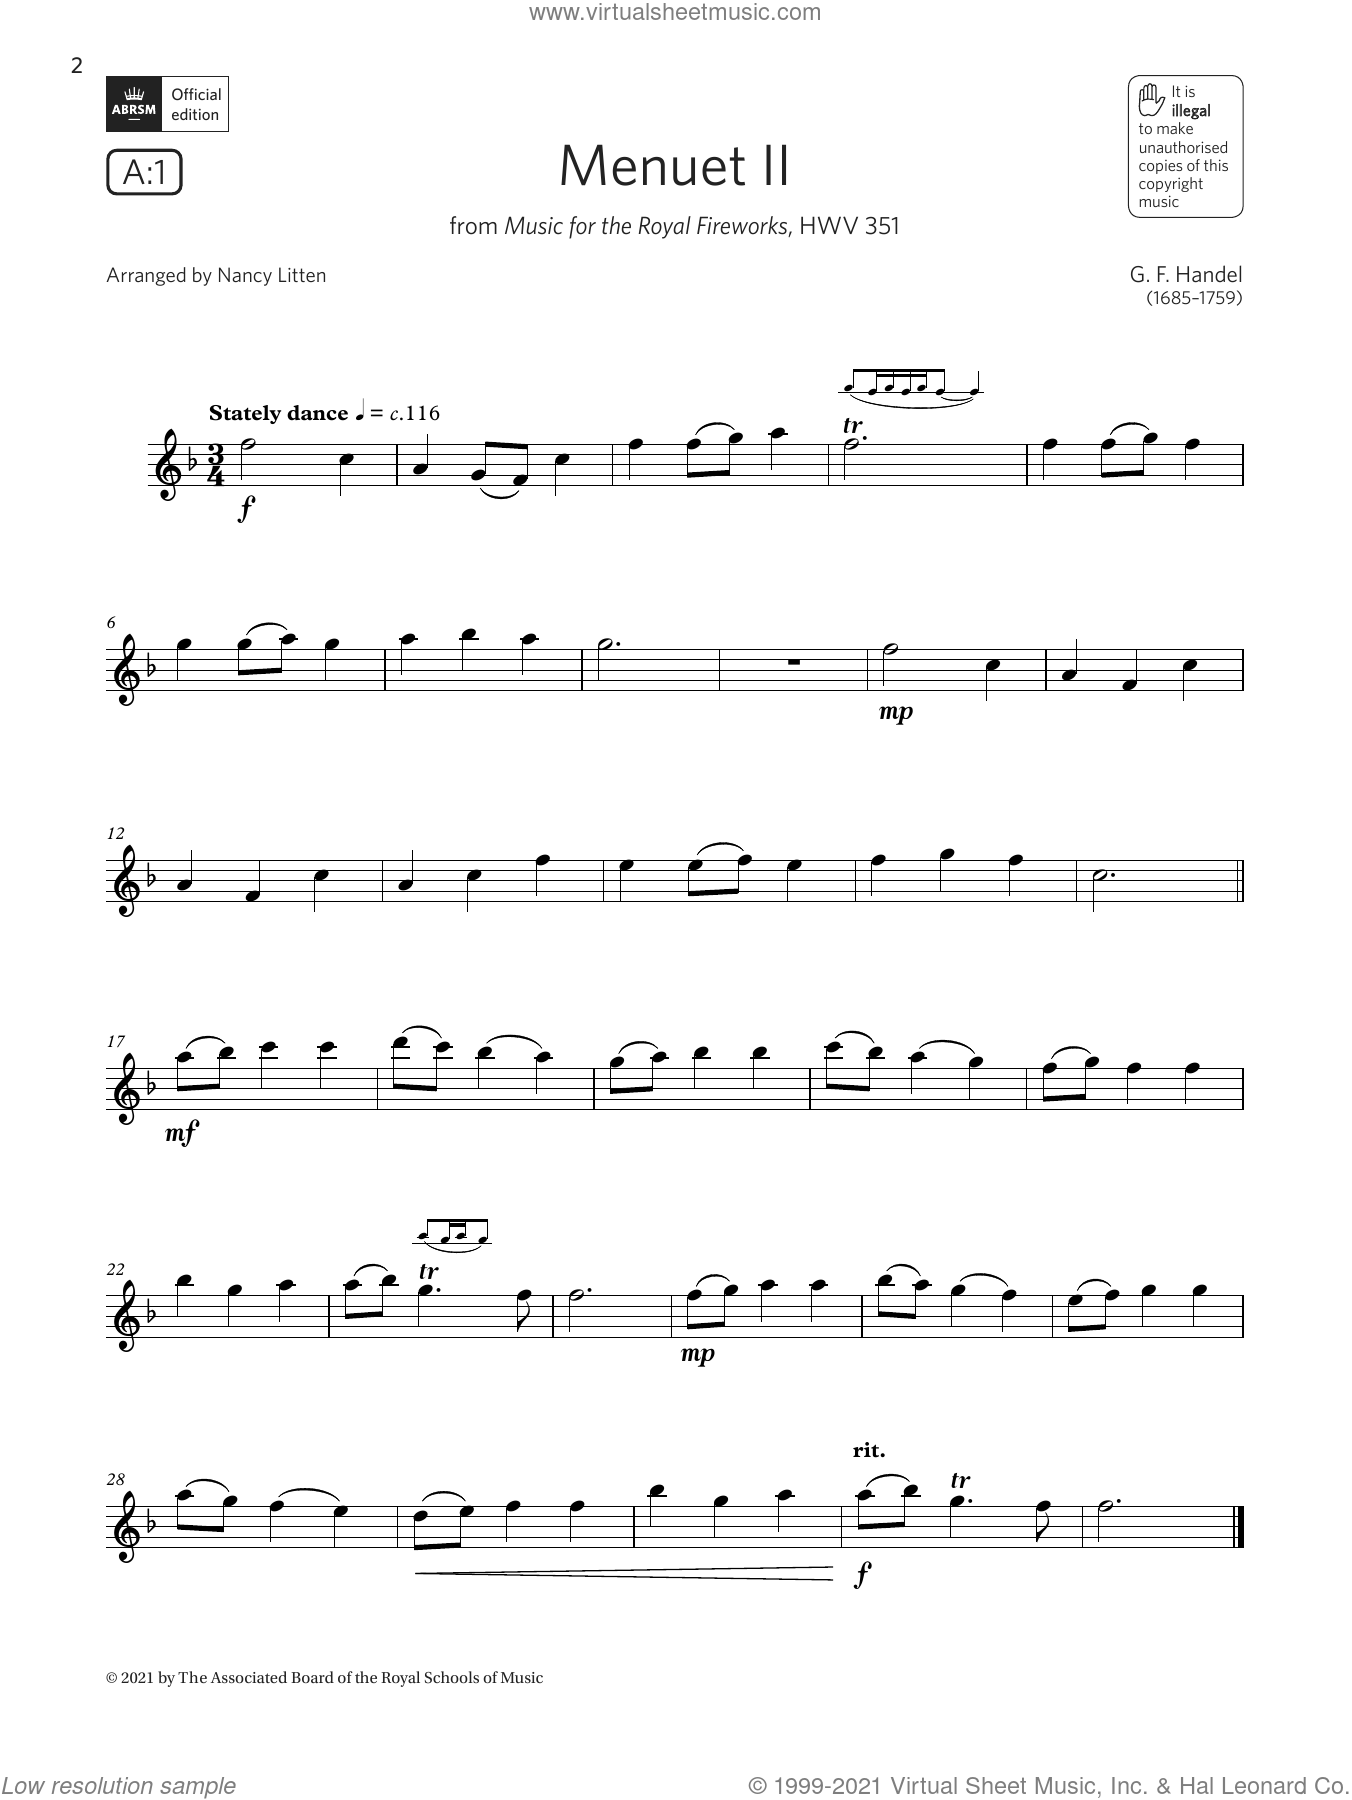 https://cdn3.virtualsheetmusic.com/images/first_pages/HL/HL-484422First_BIG.png